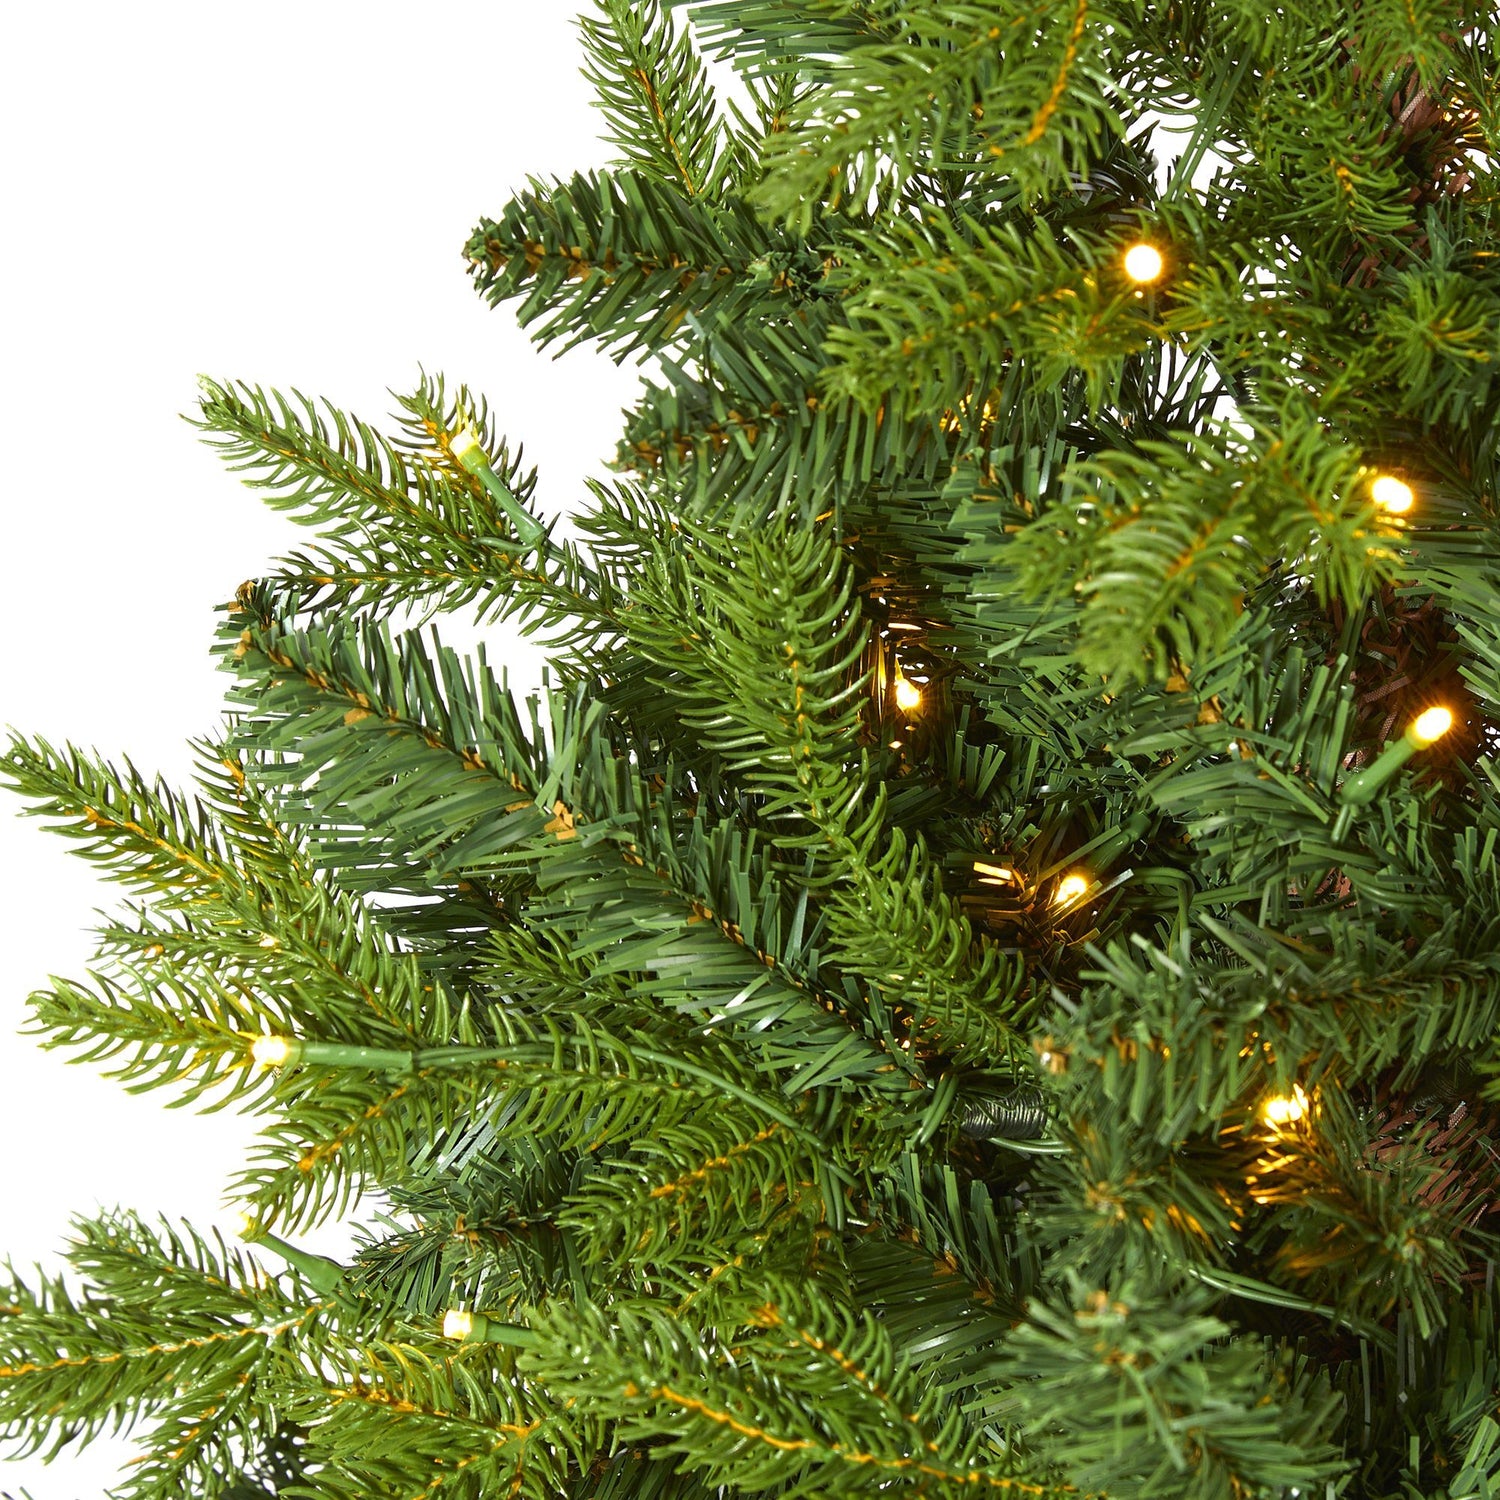 5’ Fraser Fir “Natural Look” Artificial Christmas Tree with 190 Clear LED Lights, a Burlap Base and 1217 Bendable Branches